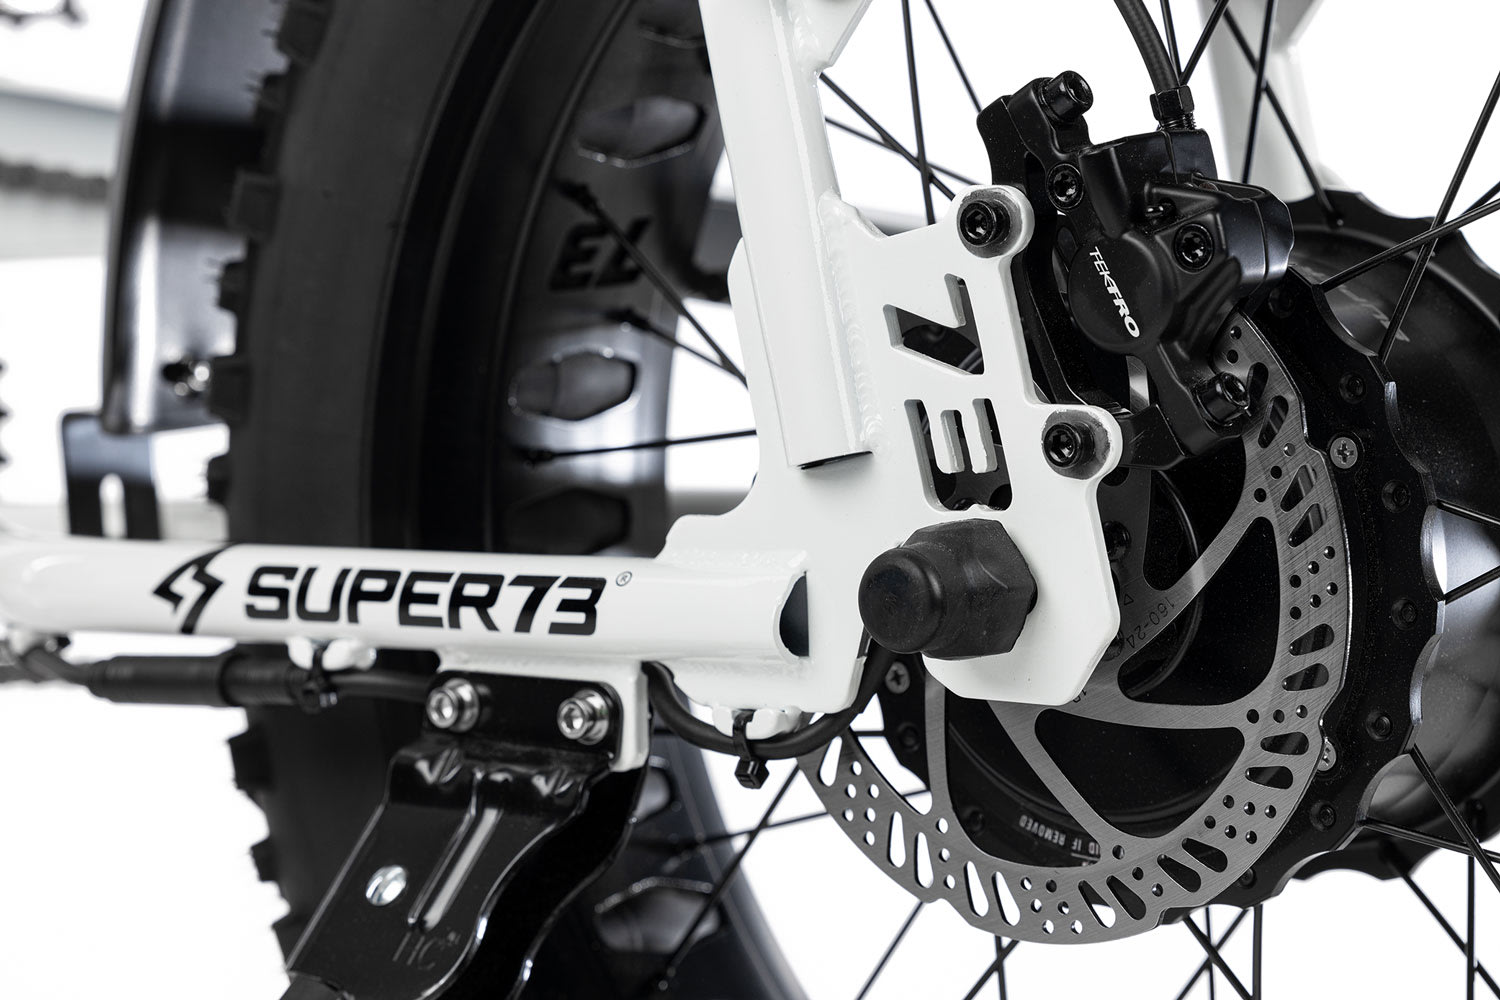 Closeup of the Super73-S1 in white rotor